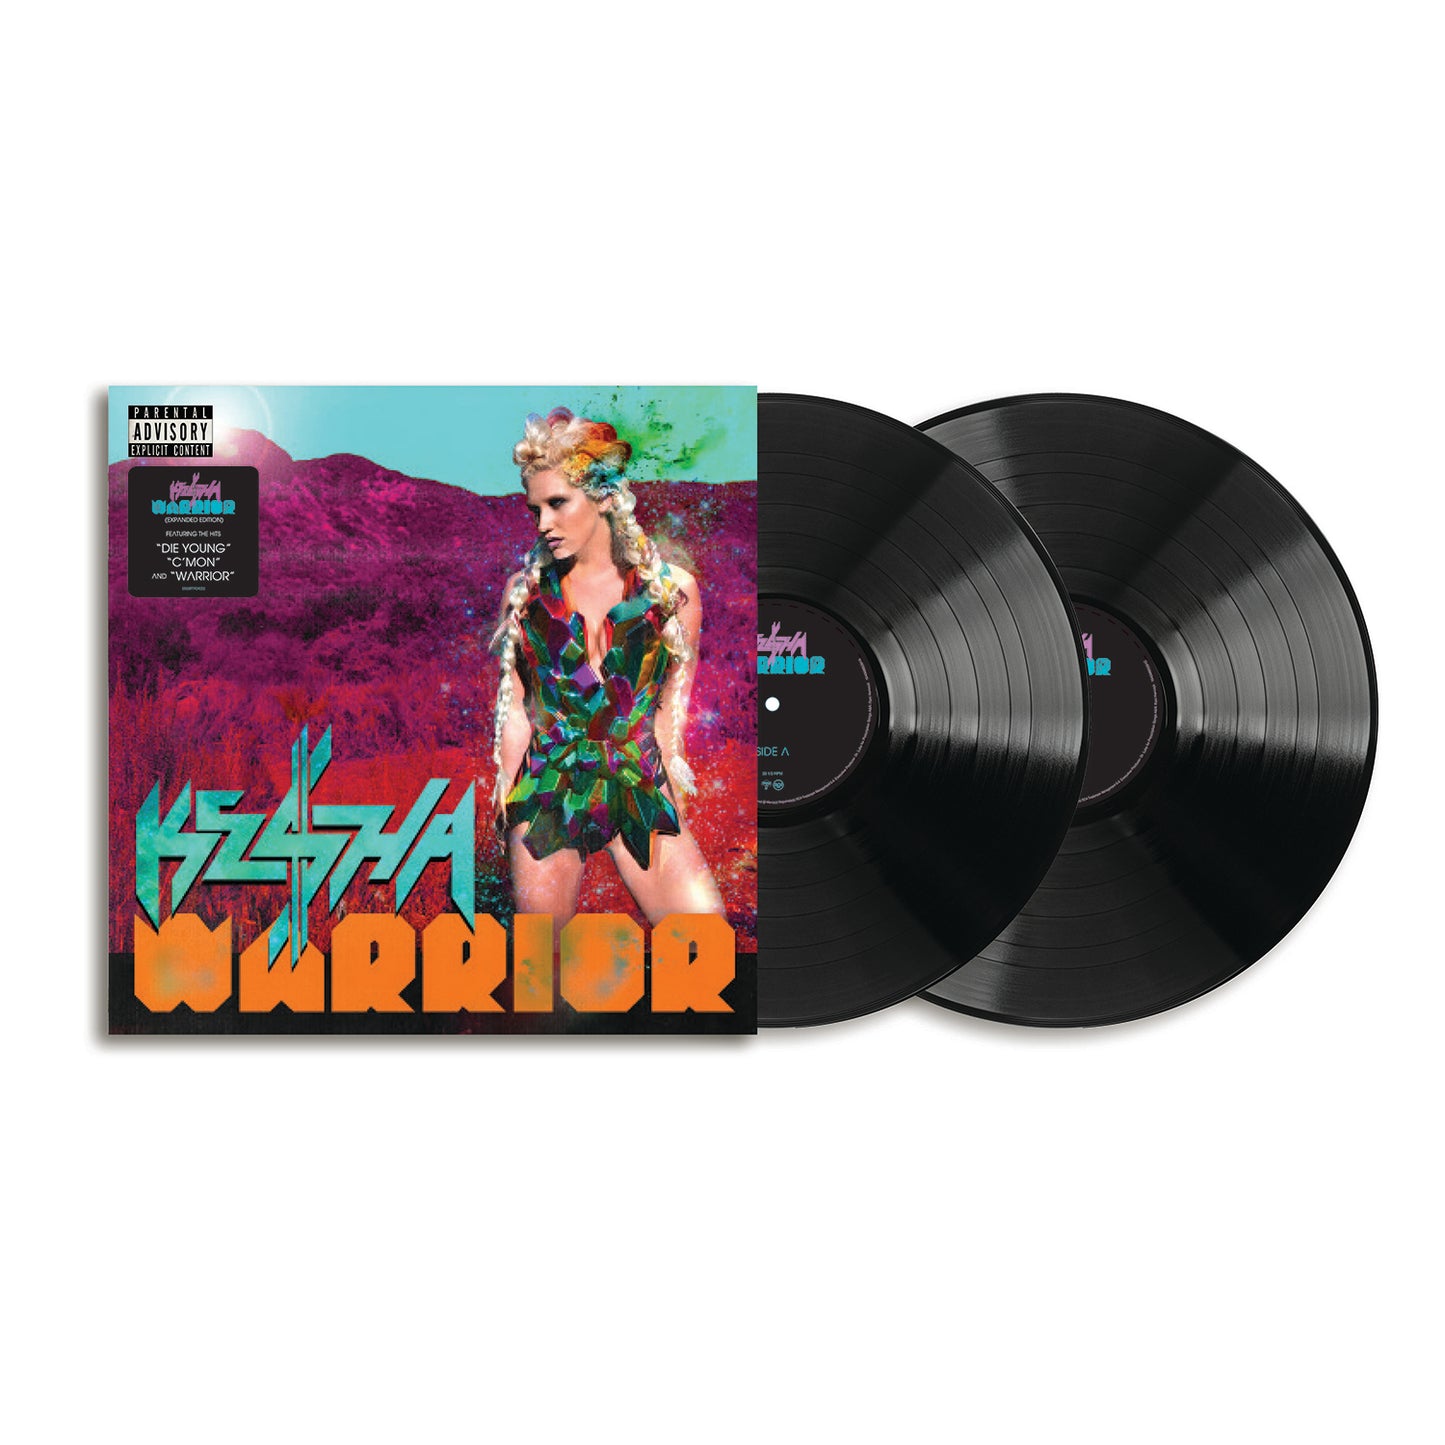 WARRIOR (EXPANDED EDITION) VINYL